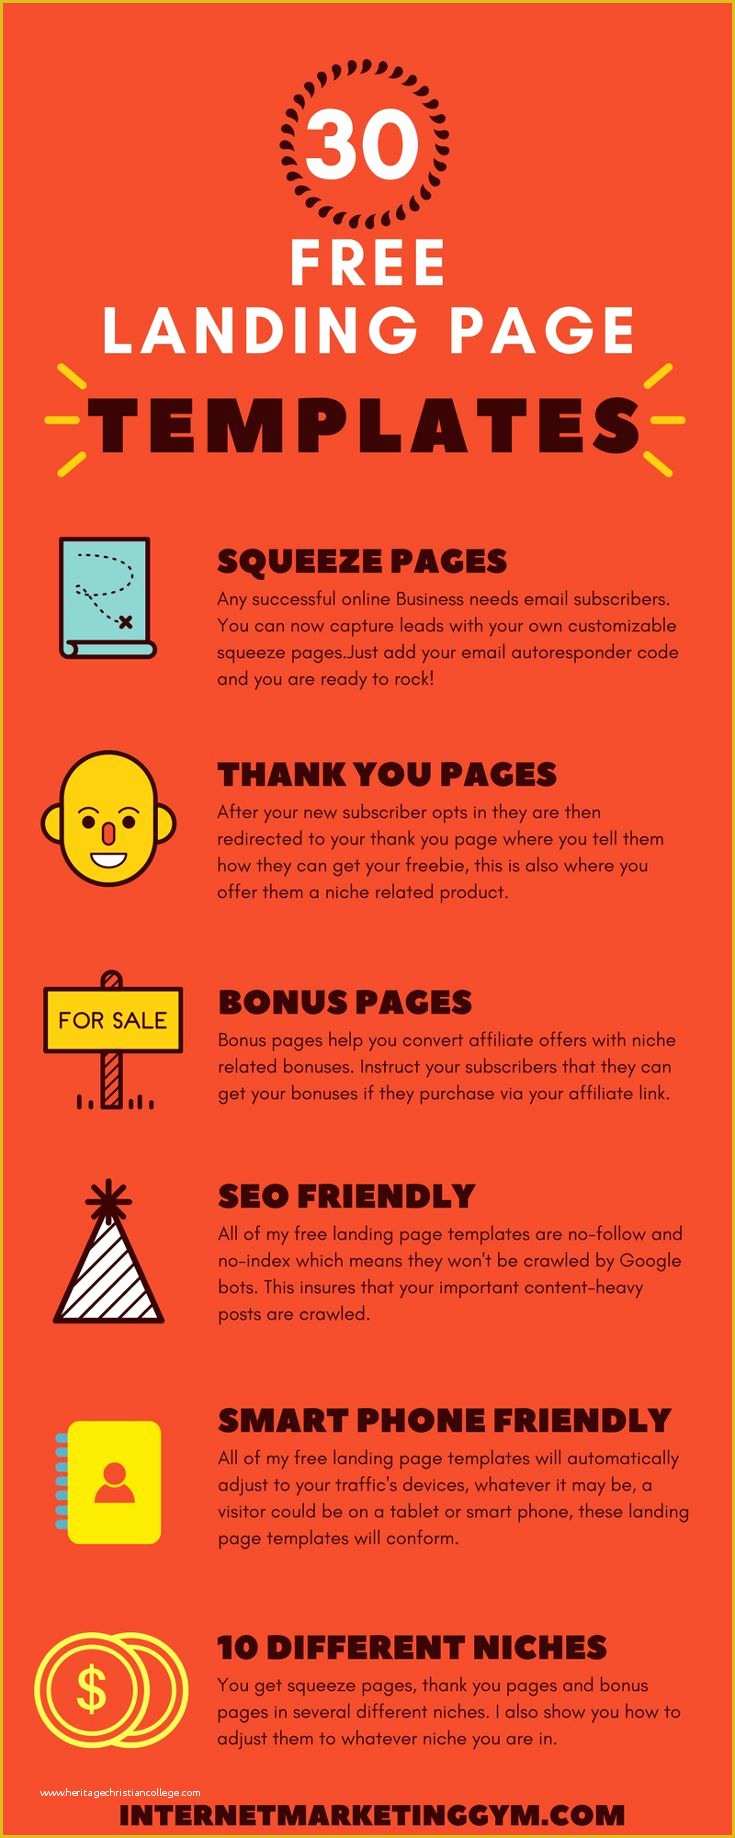 Free Squeeze Page Templates Of 25 Unique Templates Free Ideas On Pinterest